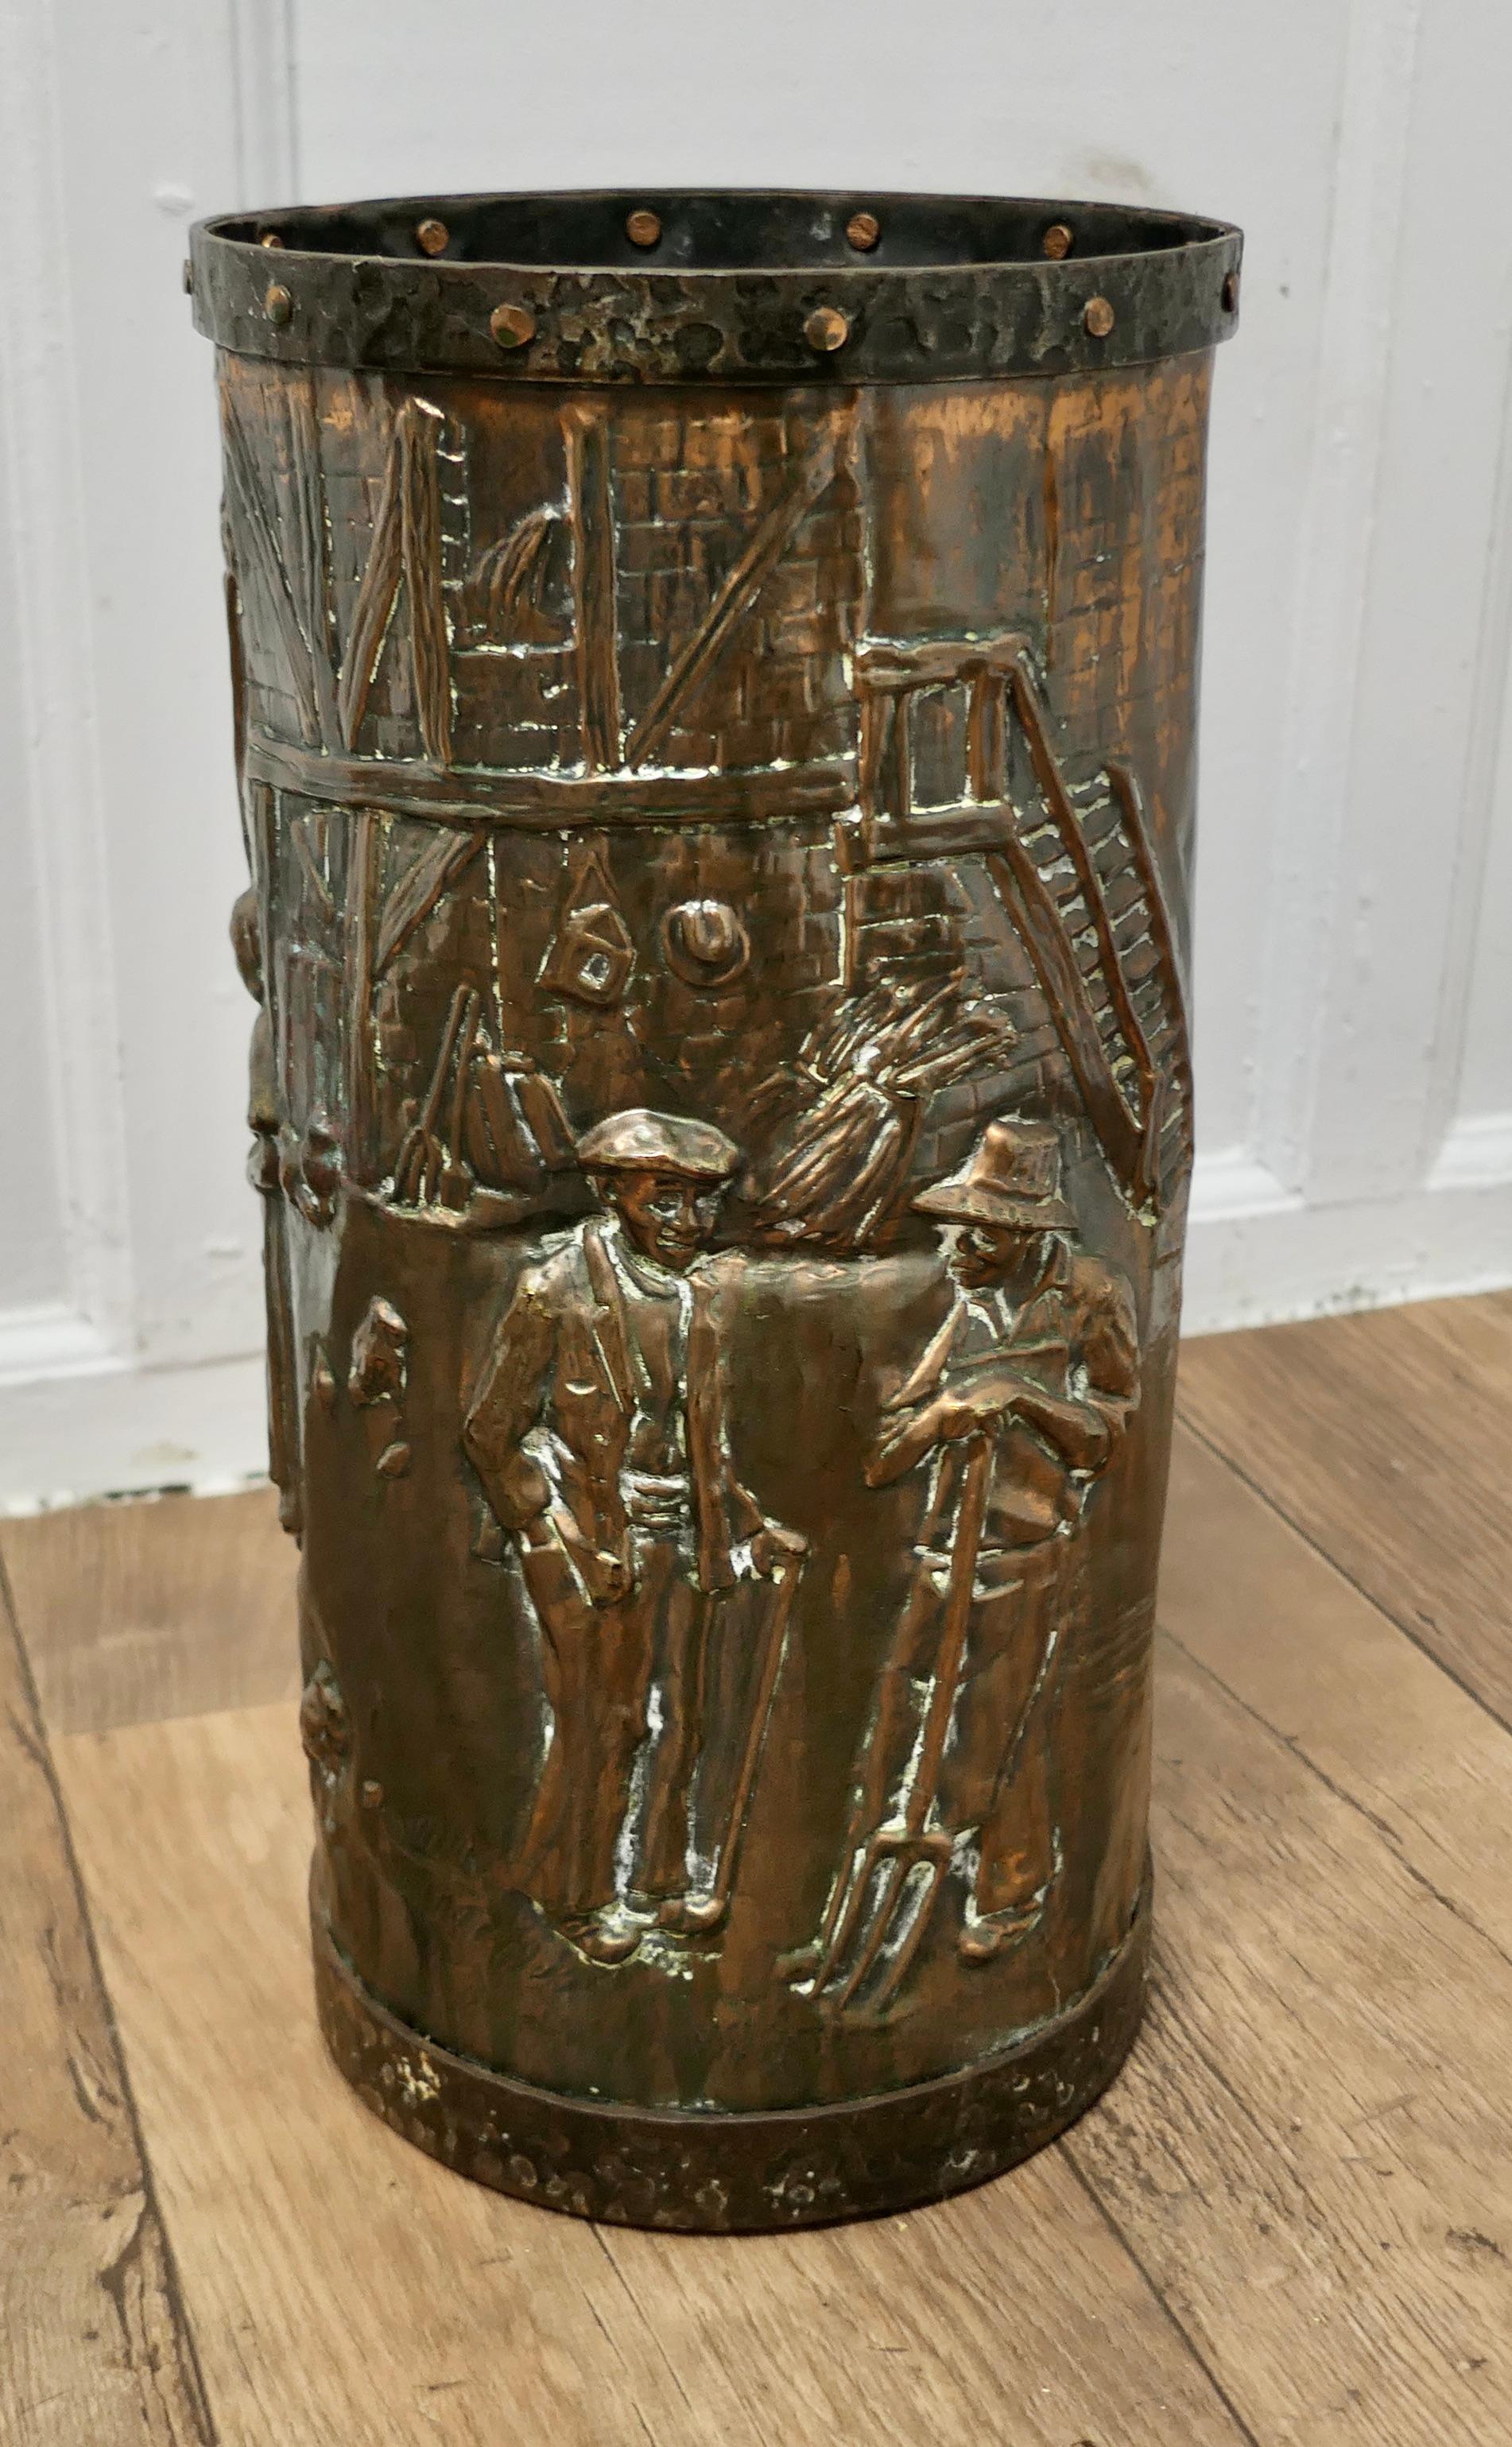 Superb Heavy French Copper and Iron Stick Stand, Umbrella Stand

A very superb quality piece, the stand is round, it has a hand beaten brass design showing Superb Heavy French Copper and Iron Stick Stand, Umbrella Stand continuous country scene,